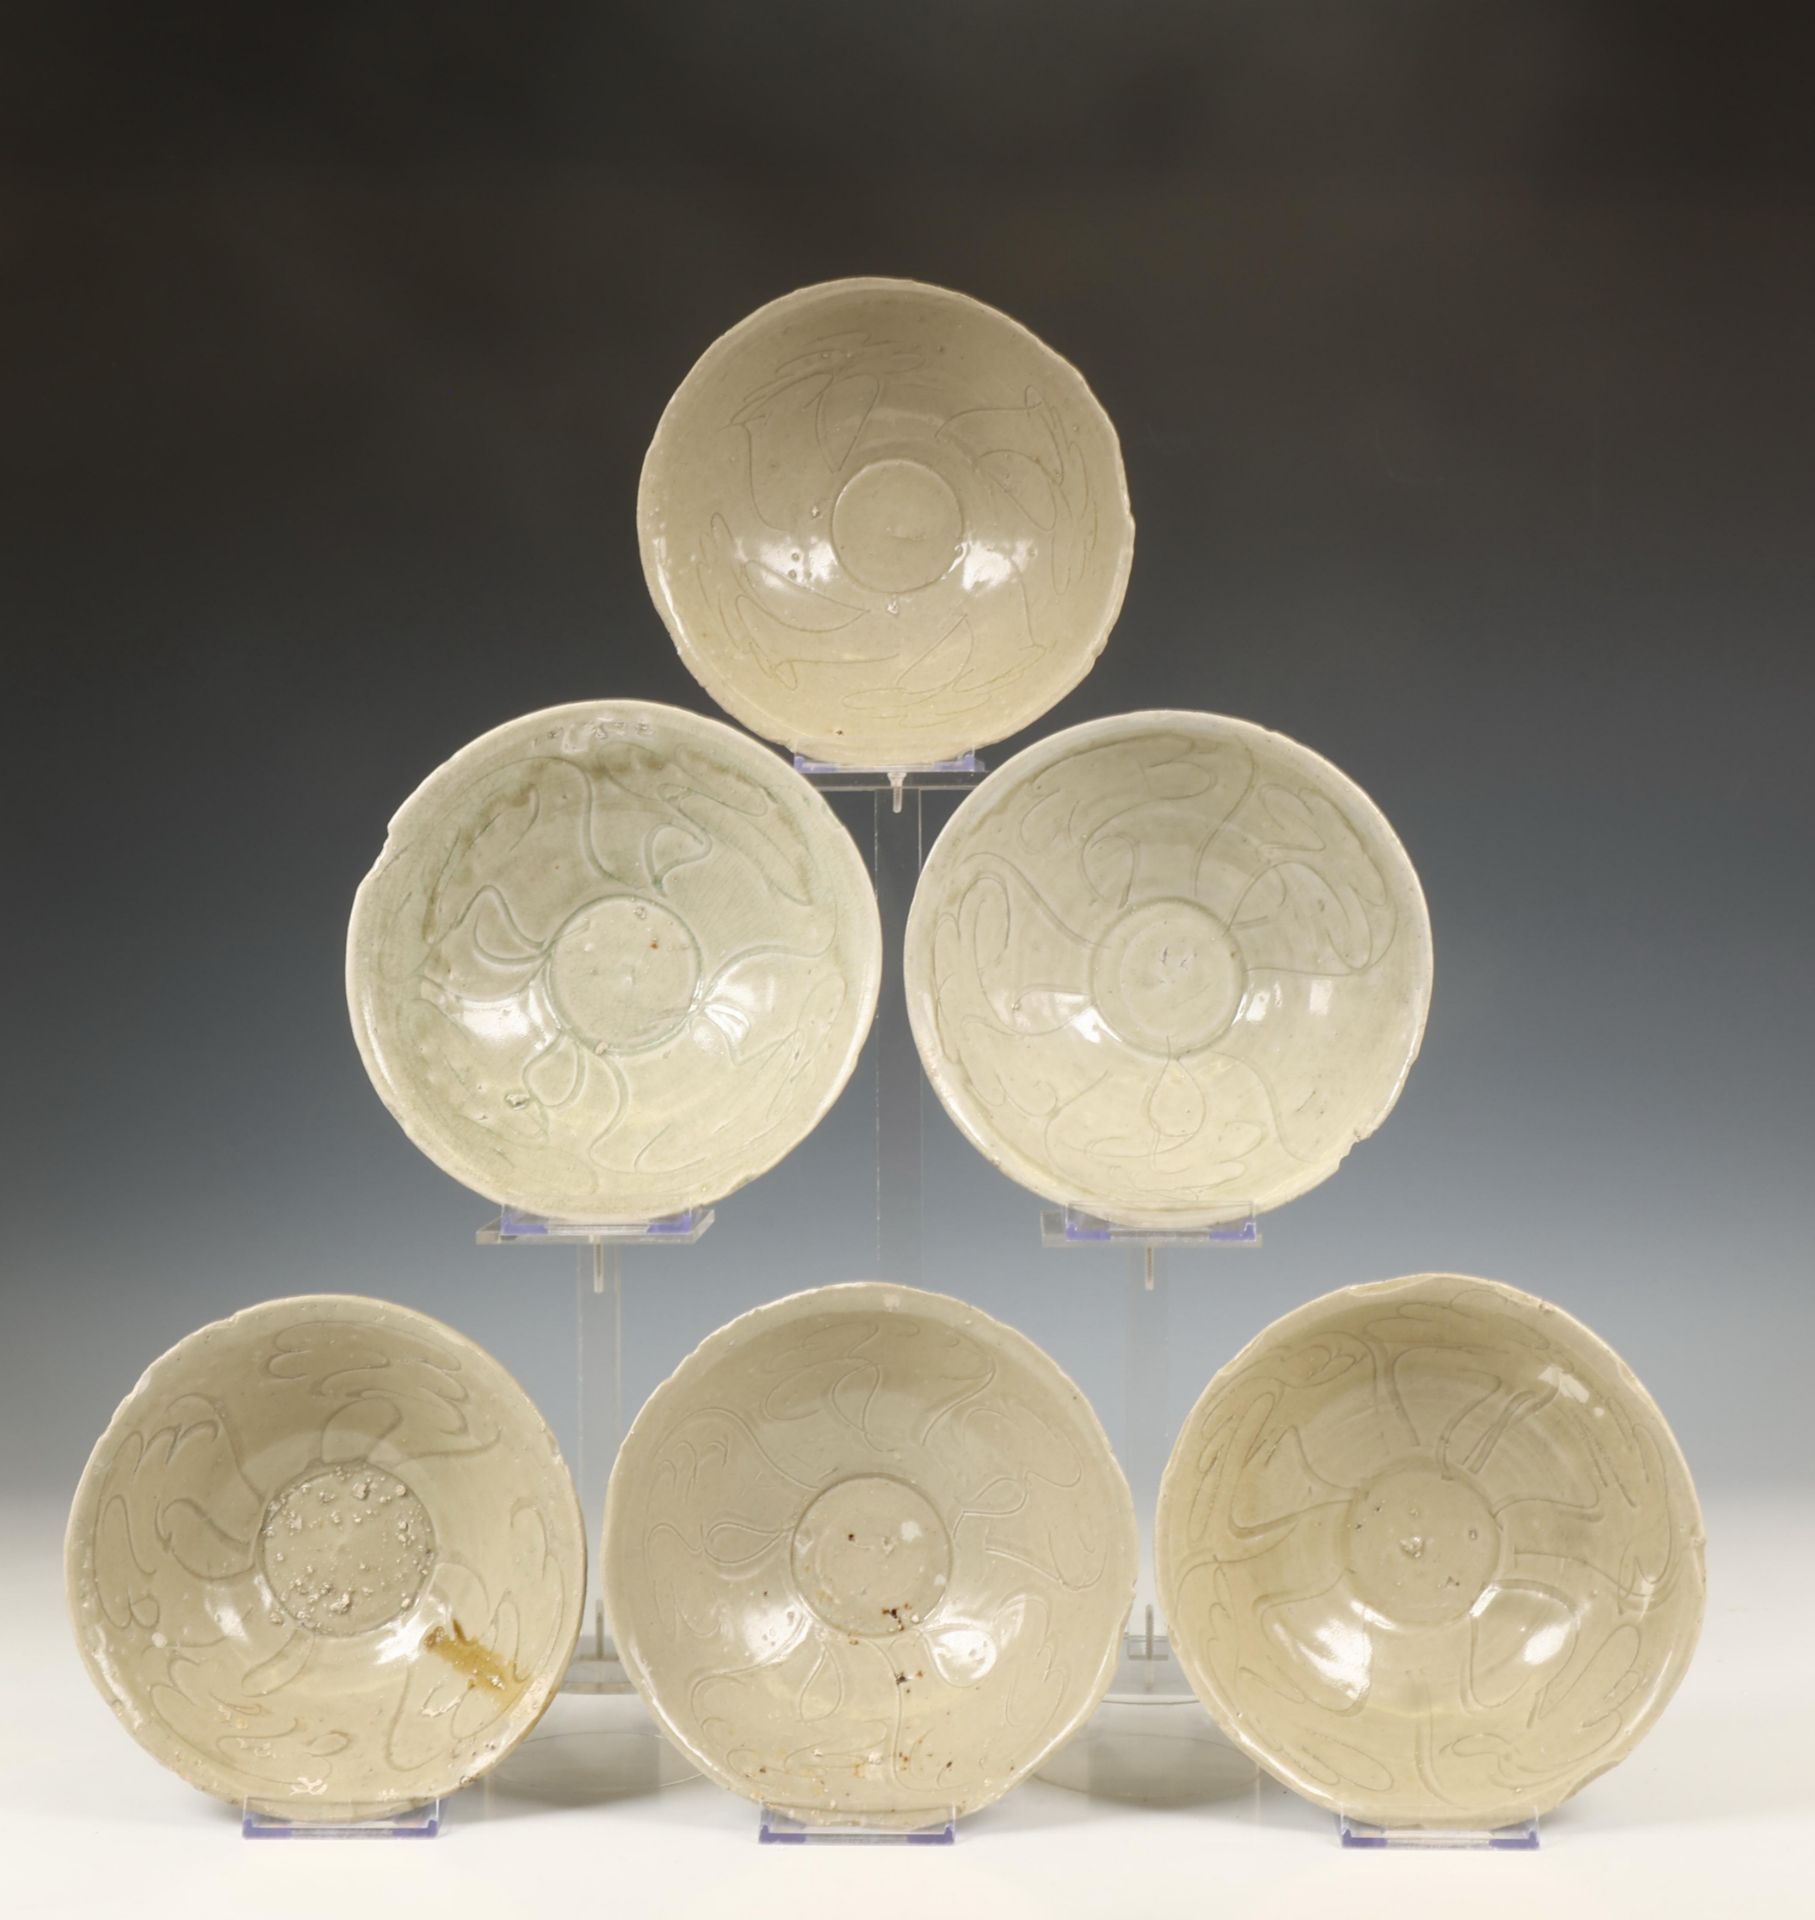 China, collection of twelve celadon-glazed bowls, Northern Song dynasty, 10th-12th century, - Image 2 of 5